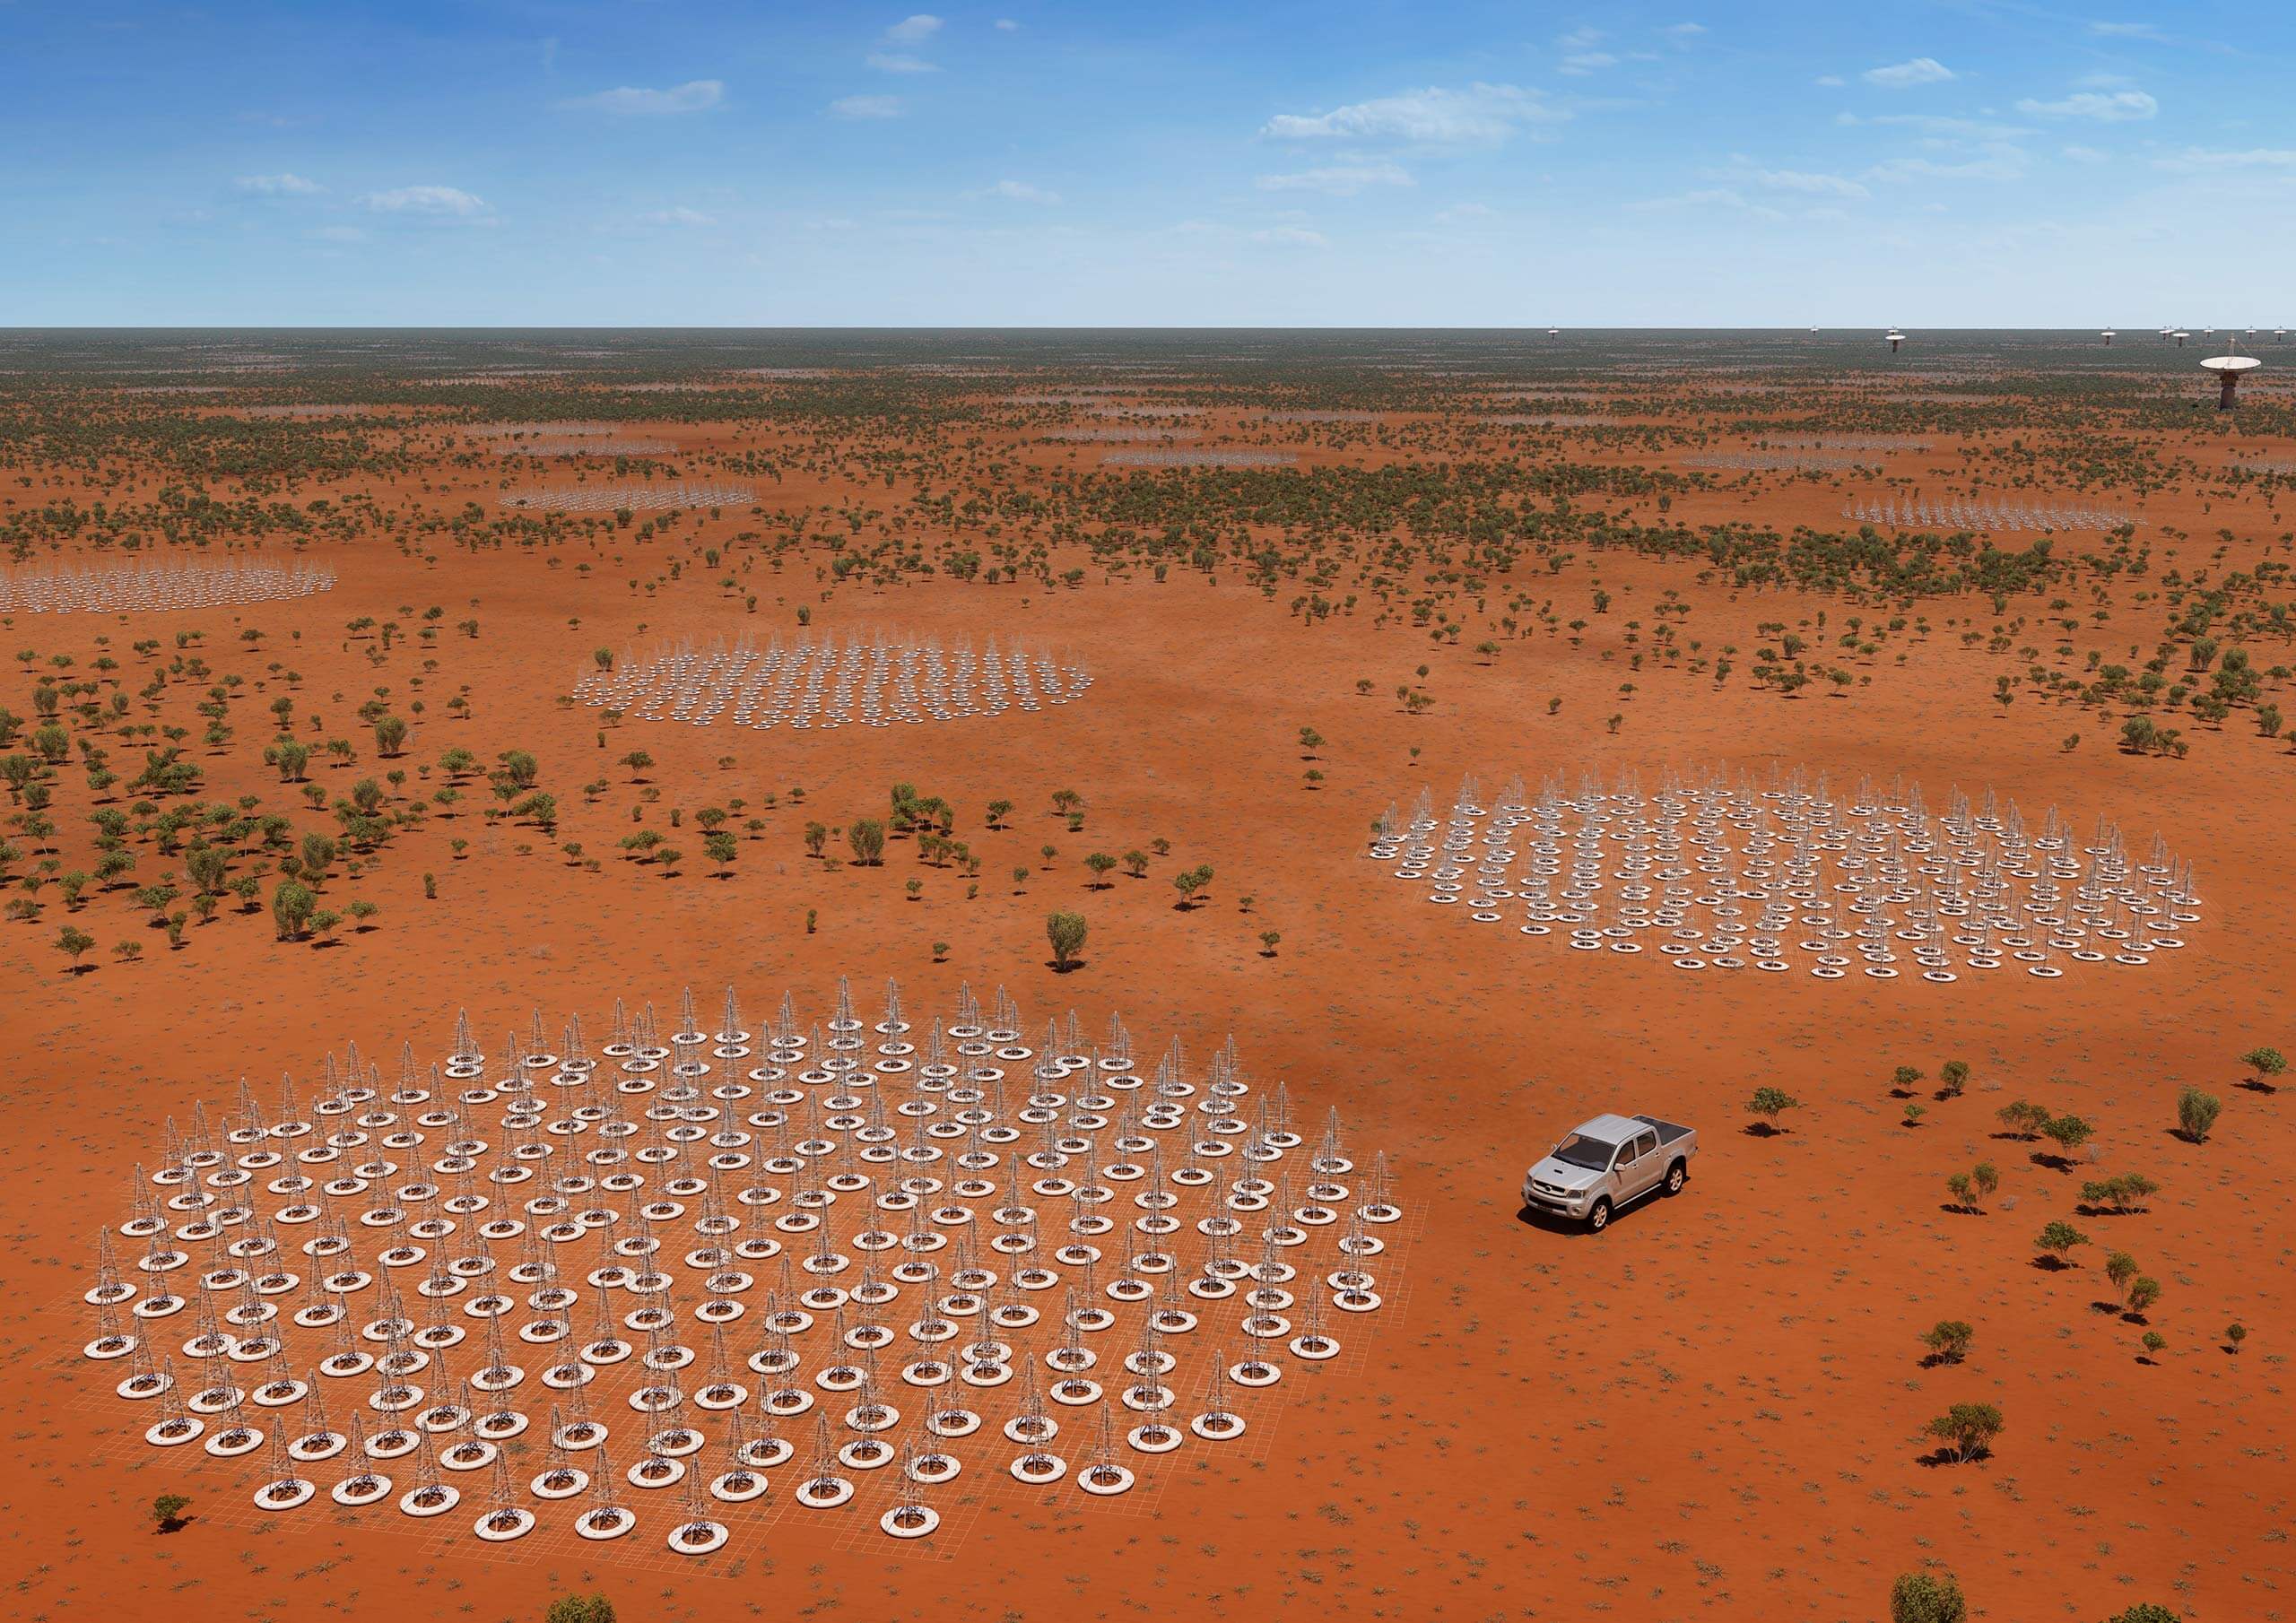 The Square Kilometer Array telescope is ten times bigger than any other in existence